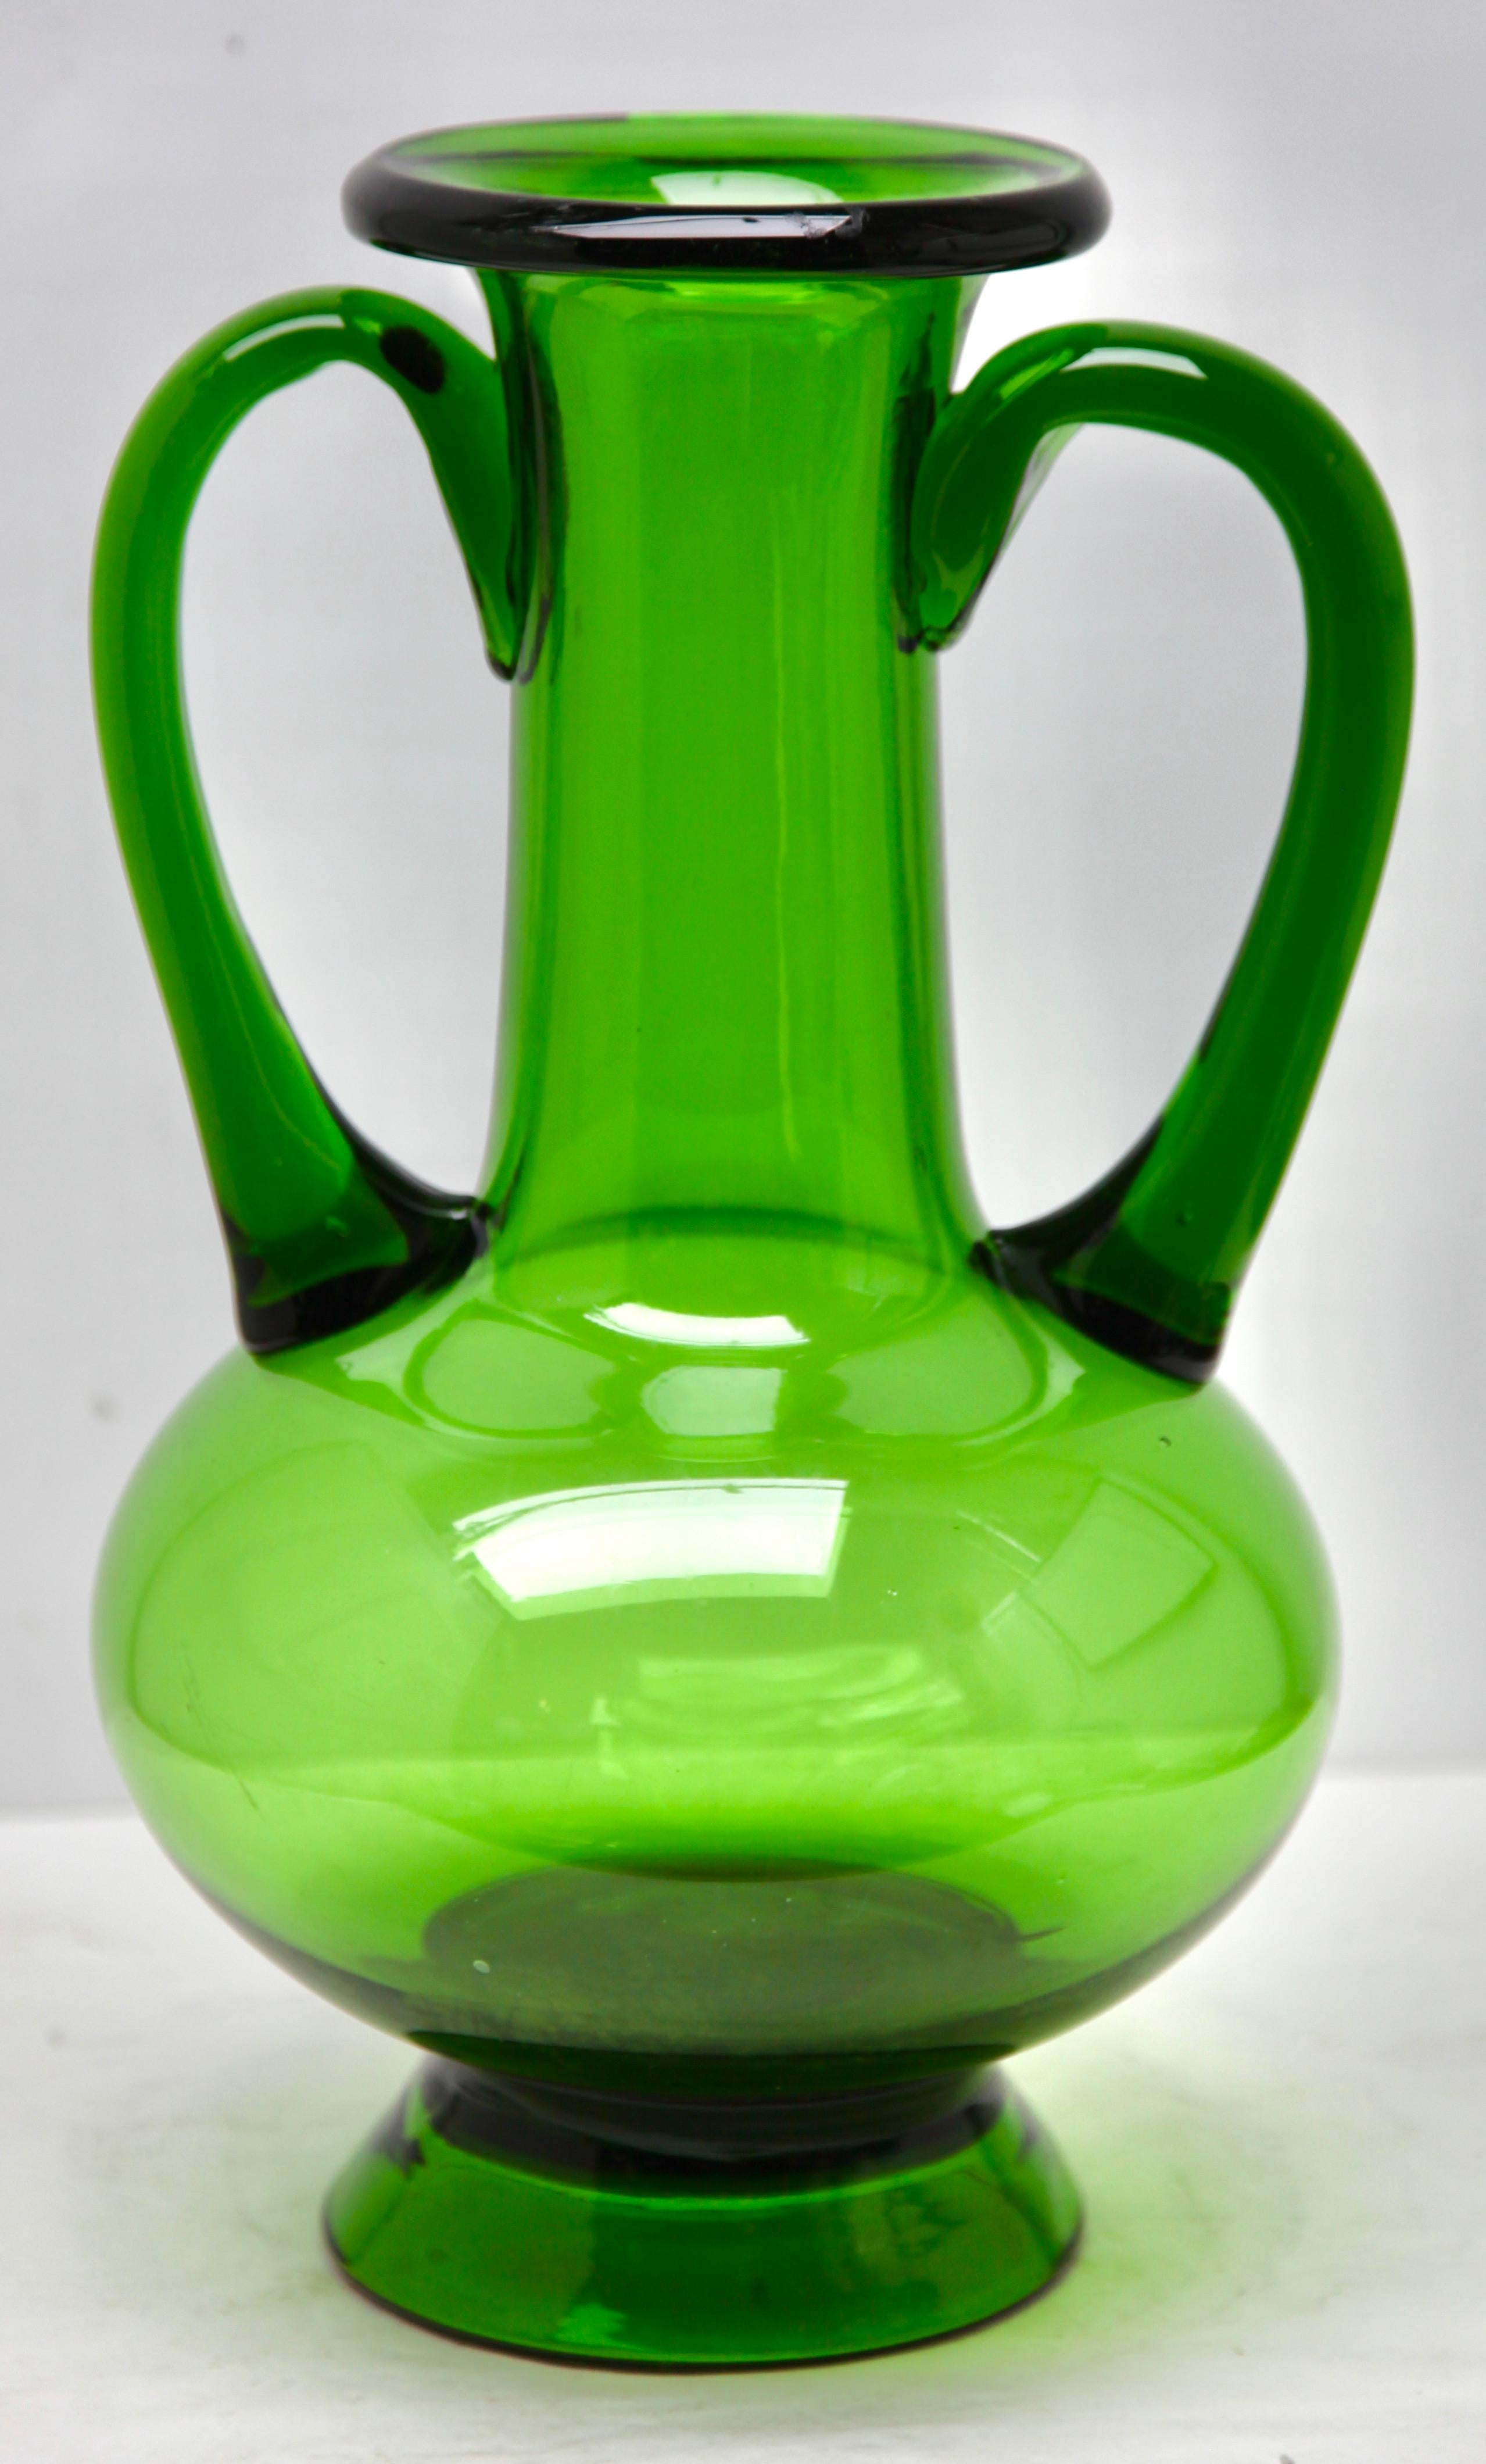 Made by the Italian craftsmen of Empoli, Florence

The carefully crafted details add flowing organic motifs and act as a handle to ensure they can be safely carried.
The large, usable vase provides a solid pitcher form suitable for a few tall